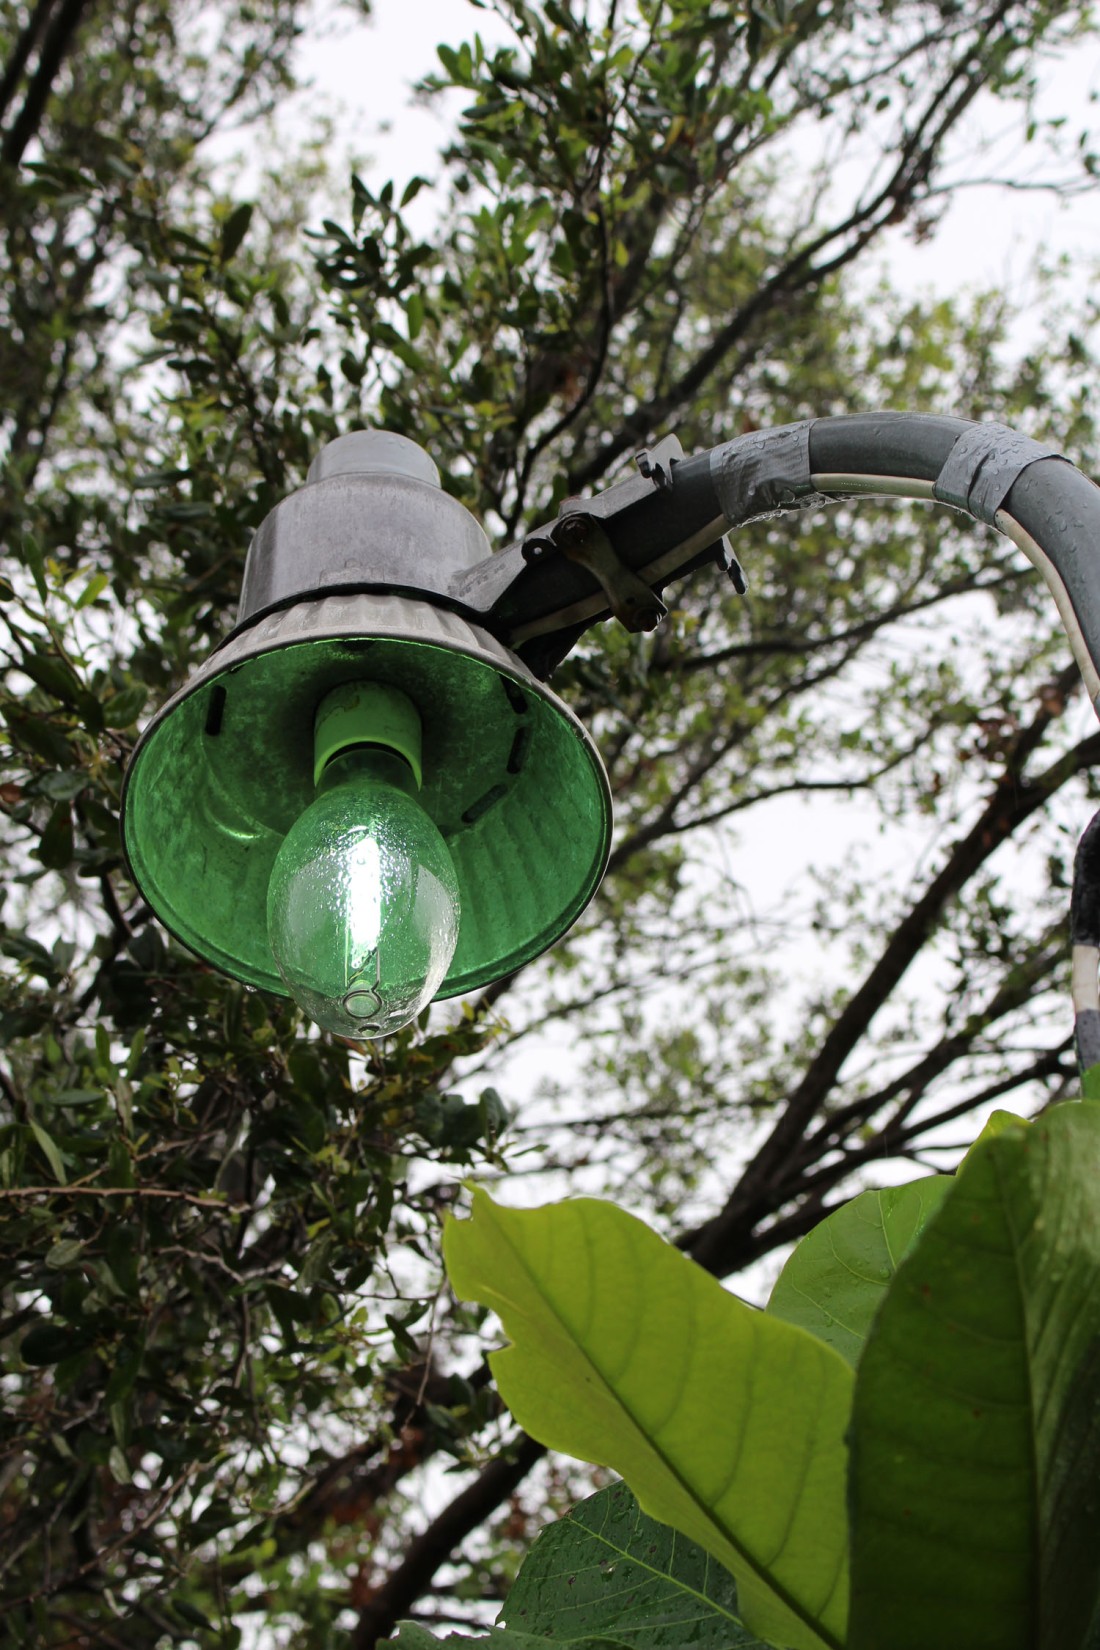 John DeFaro LIghts Back Off project lamp post top with bulb turning on depicting green glow 2017